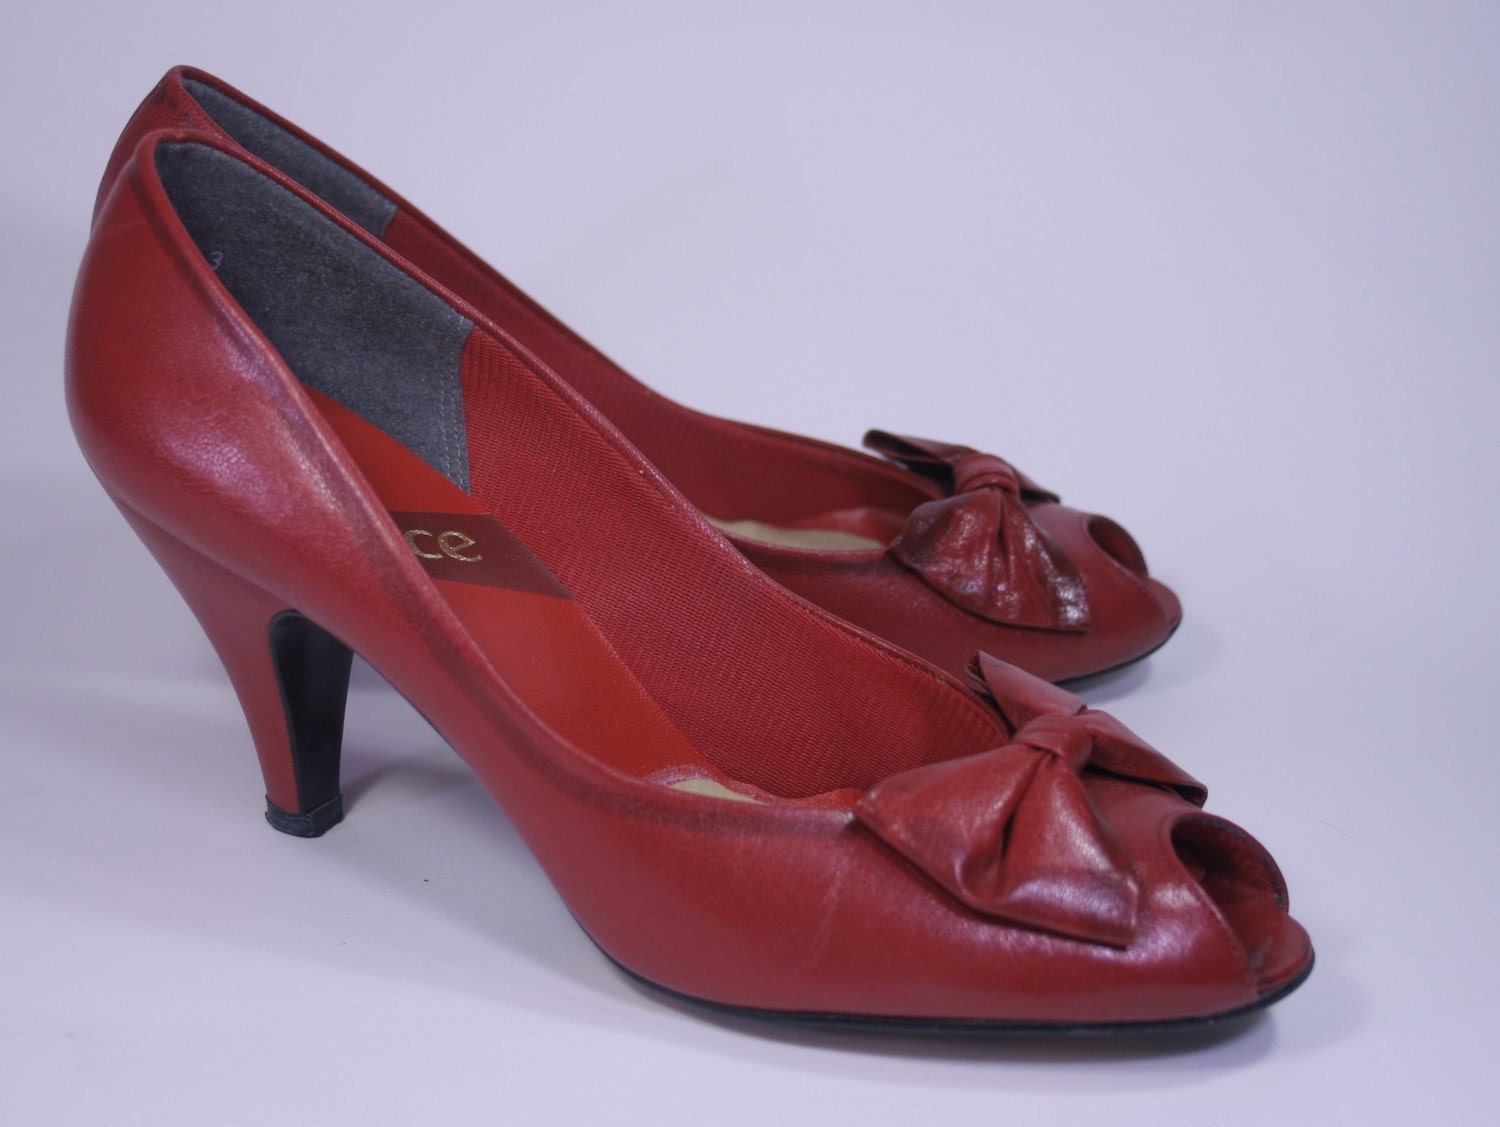 Vintage Cherry Red Peep Toe with Bow Betty Boop Pin Up Leather High Heels, Womens 7